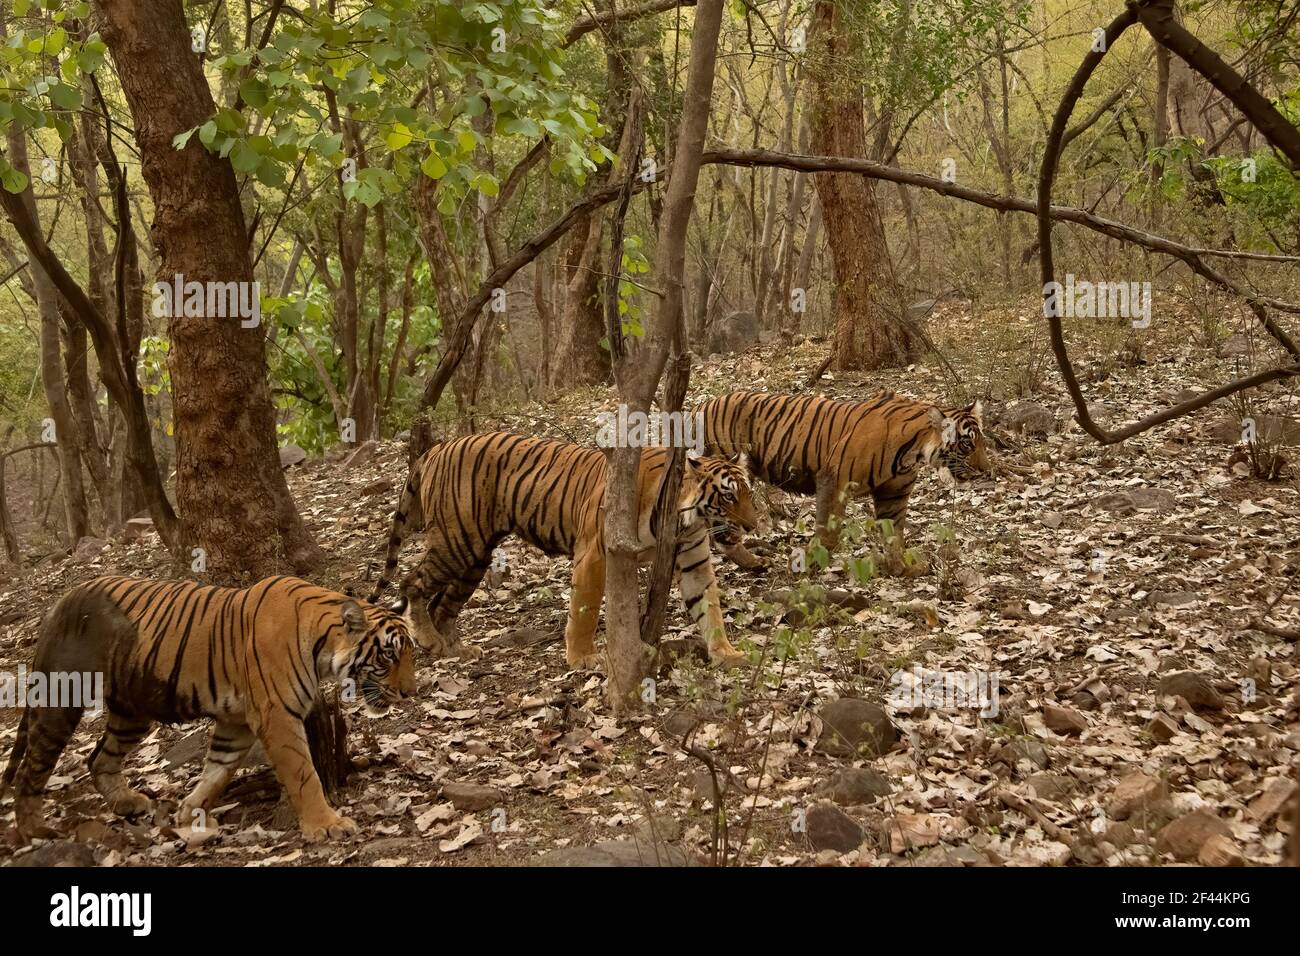 Three tigers, a mother and two nearly full grown cubs walking in the green forests of Ranthambhore during the monsoons season in India Stock Photo